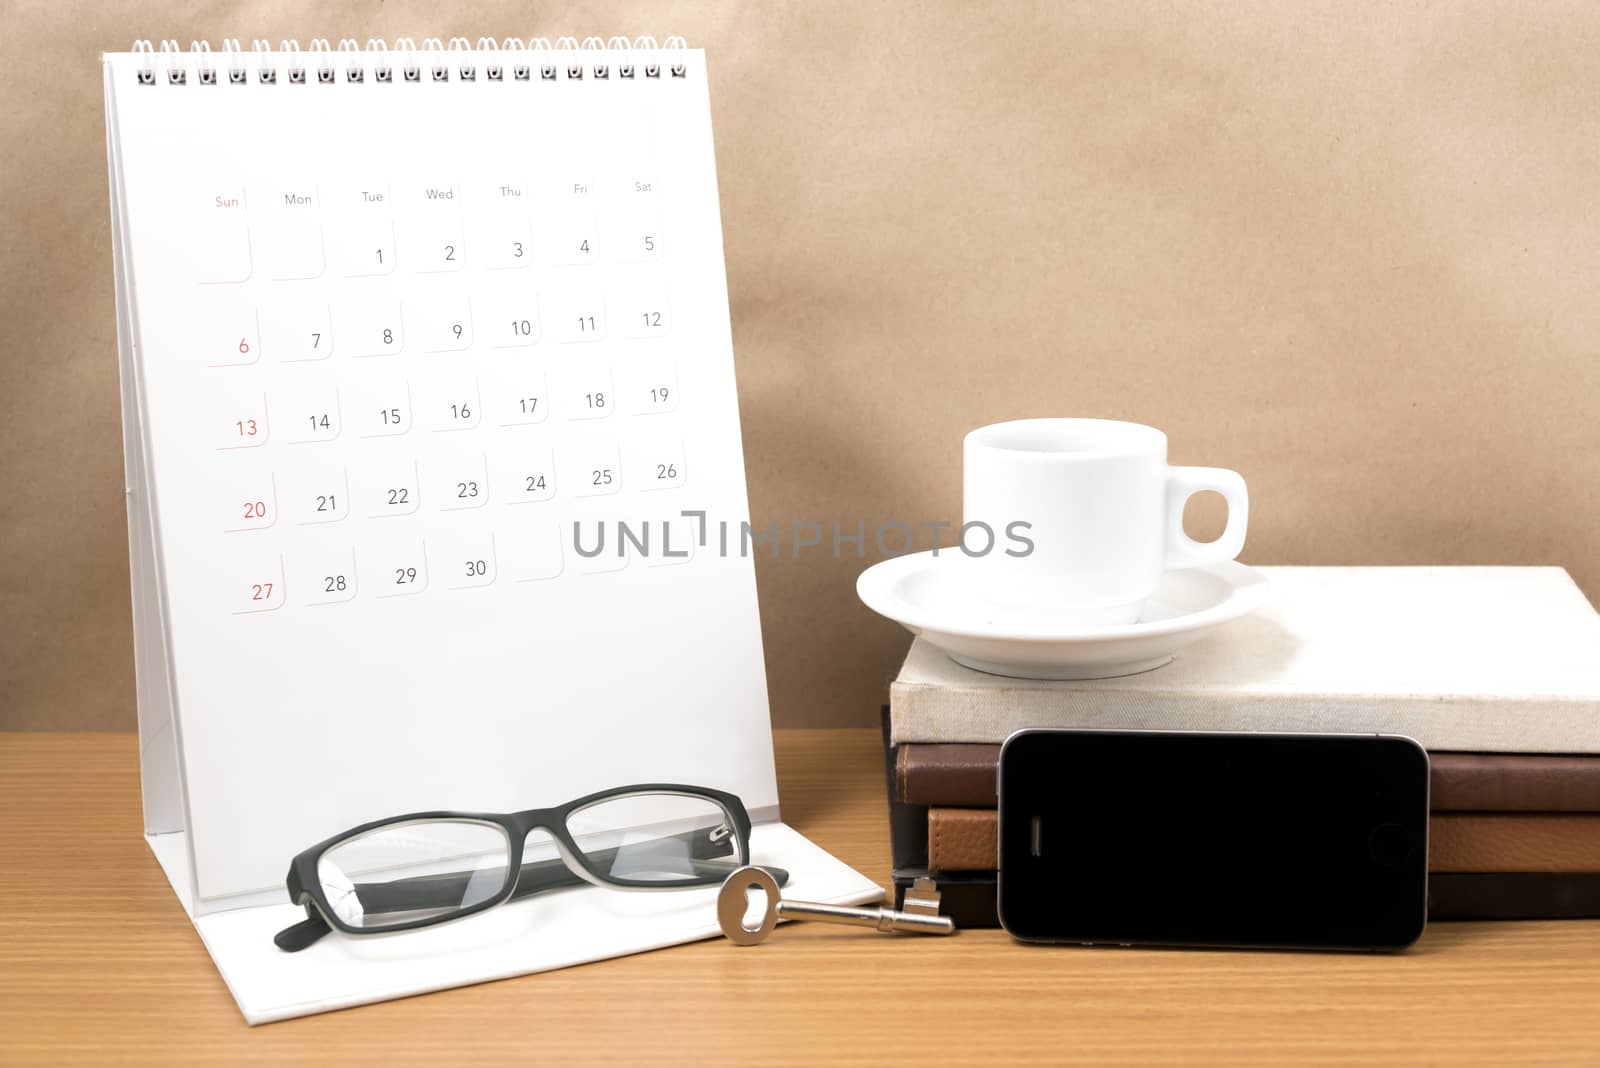 coffee and phone with key,eyeglasses,stack of book,calendar on wood background